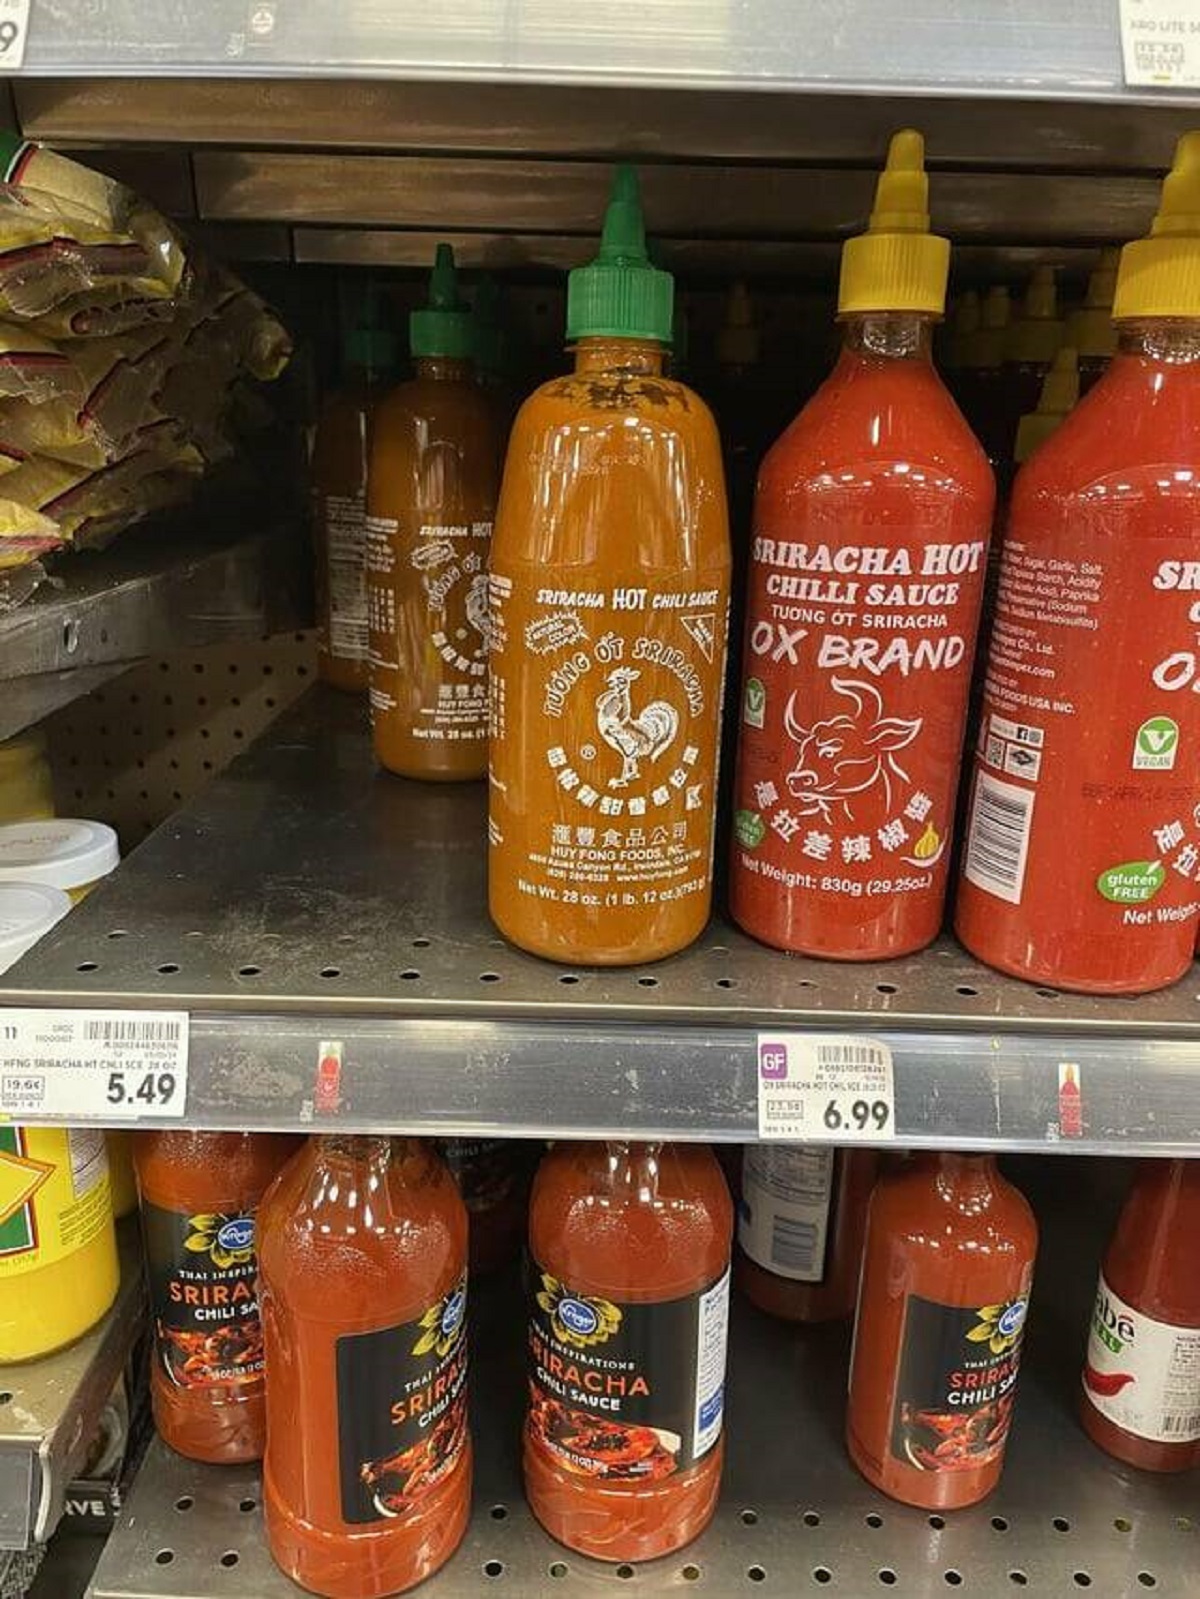 "Oddly colored Siracha"